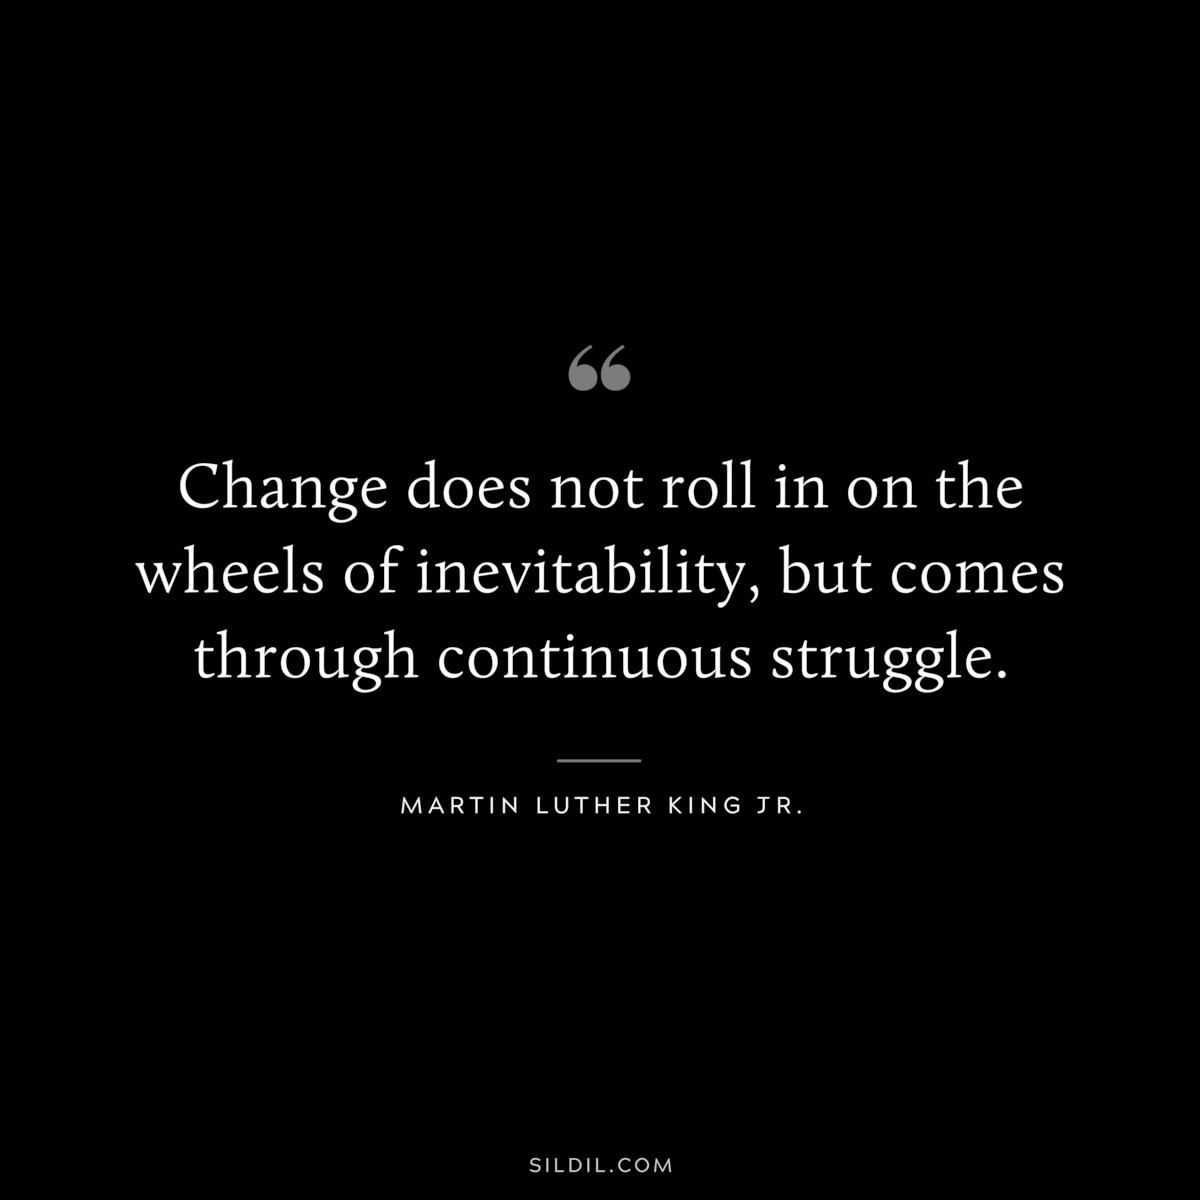 Change does not roll in on the wheels of inevitability, but comes through continuous struggle. ― Martin Luther King Jr.